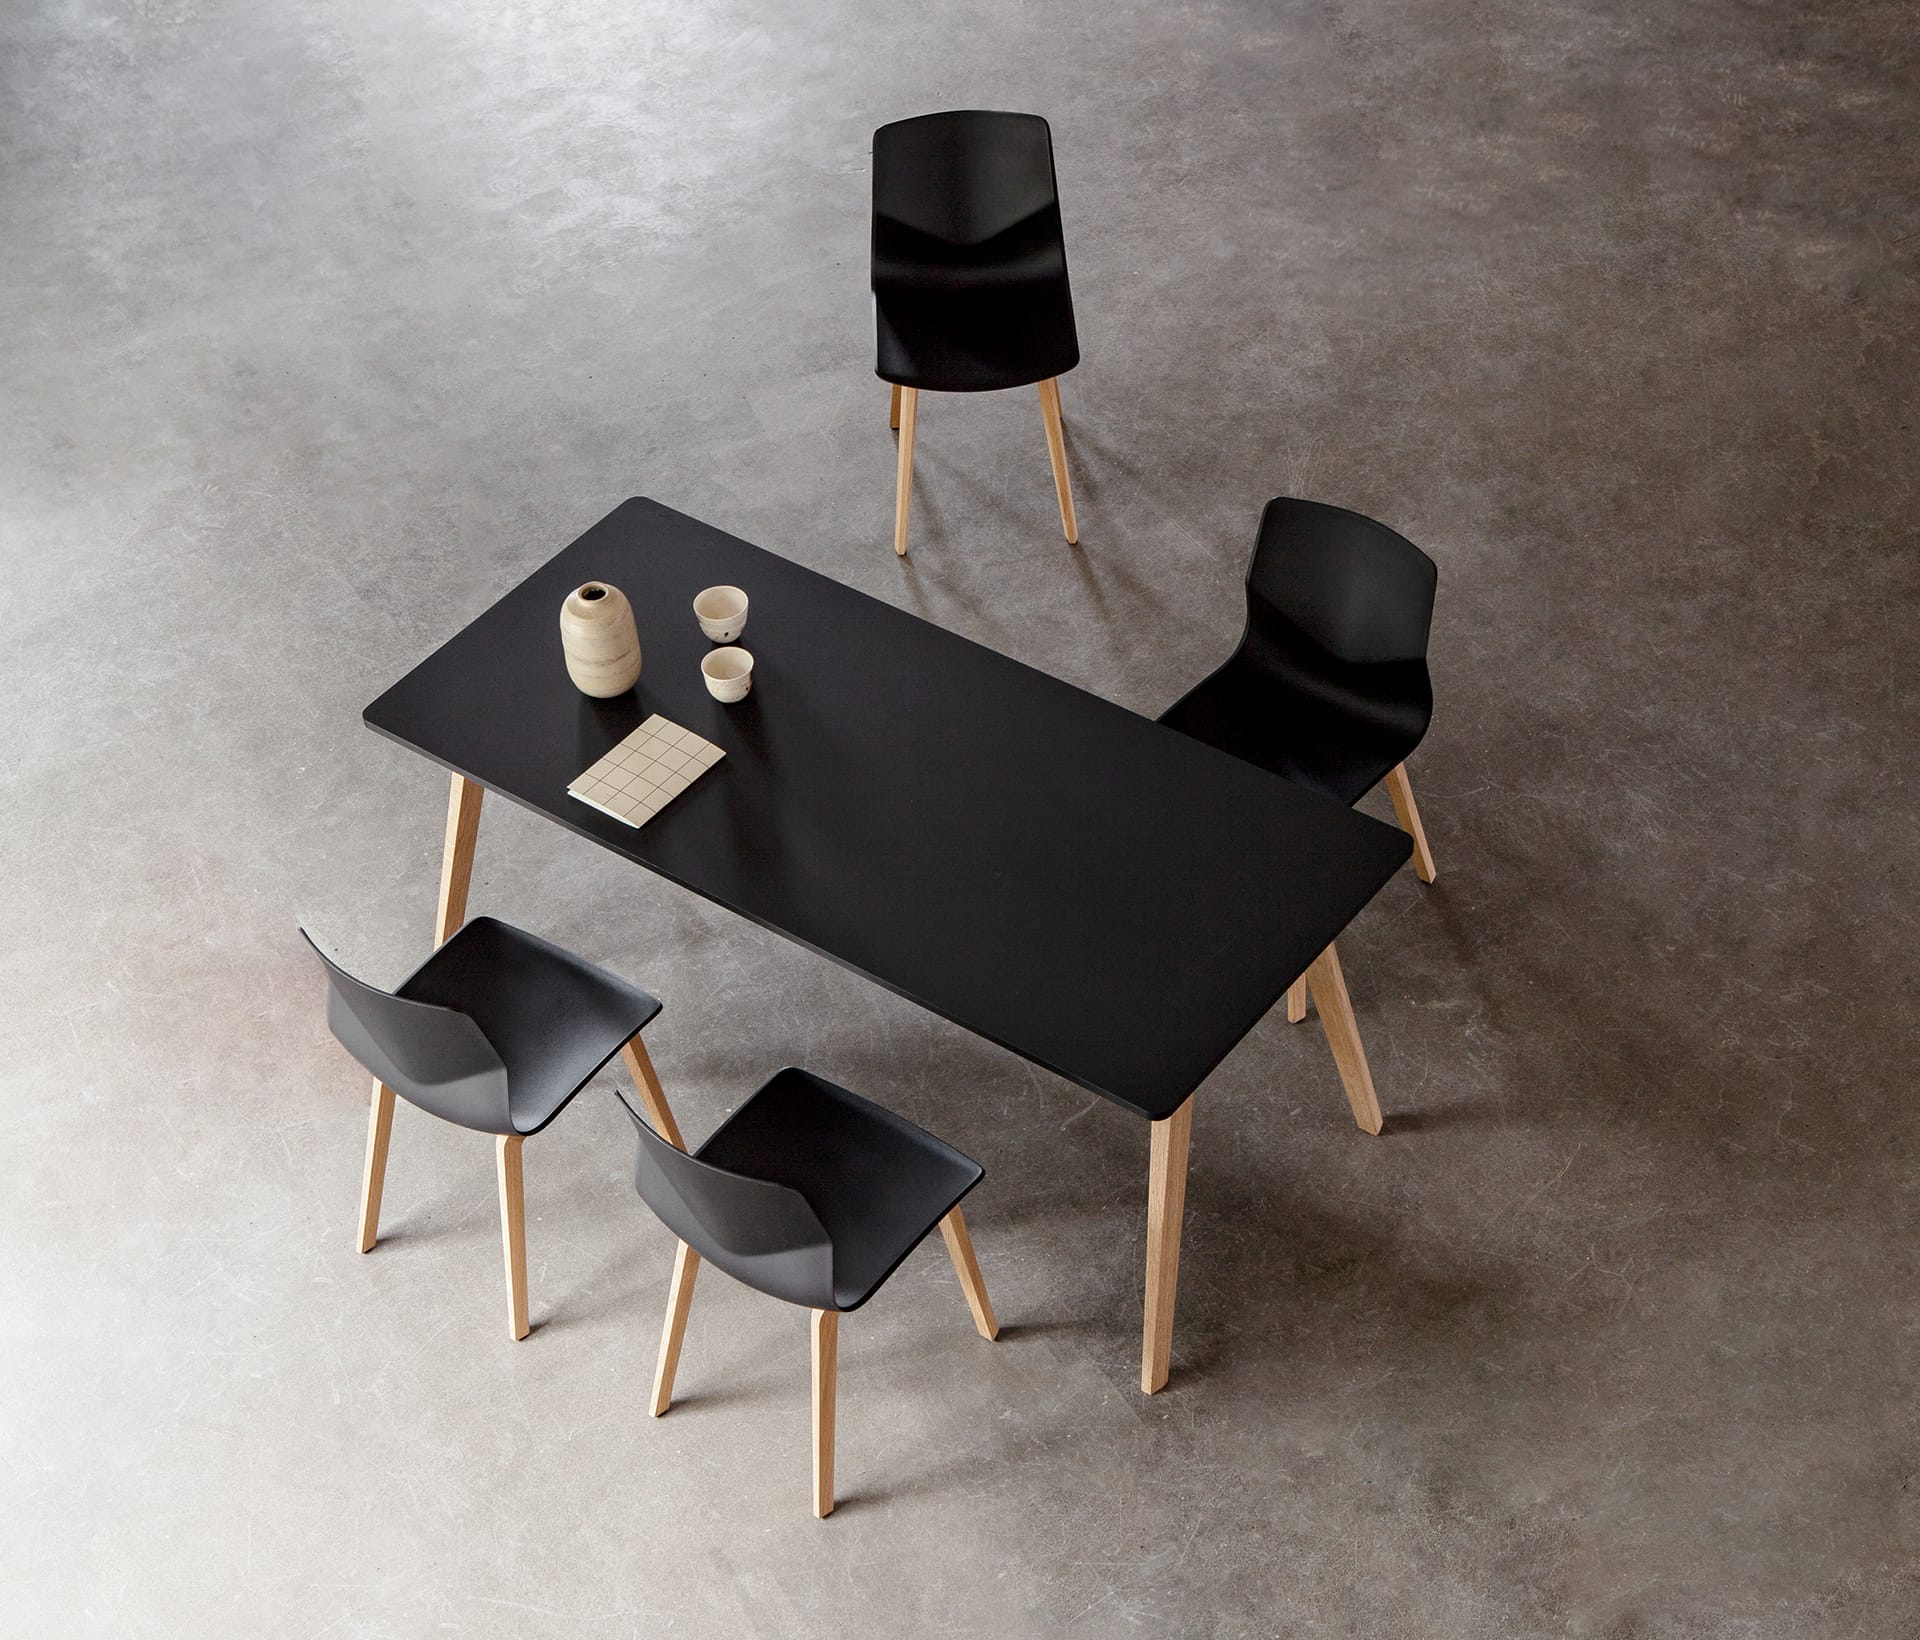 A black table with four black office desk chairs.